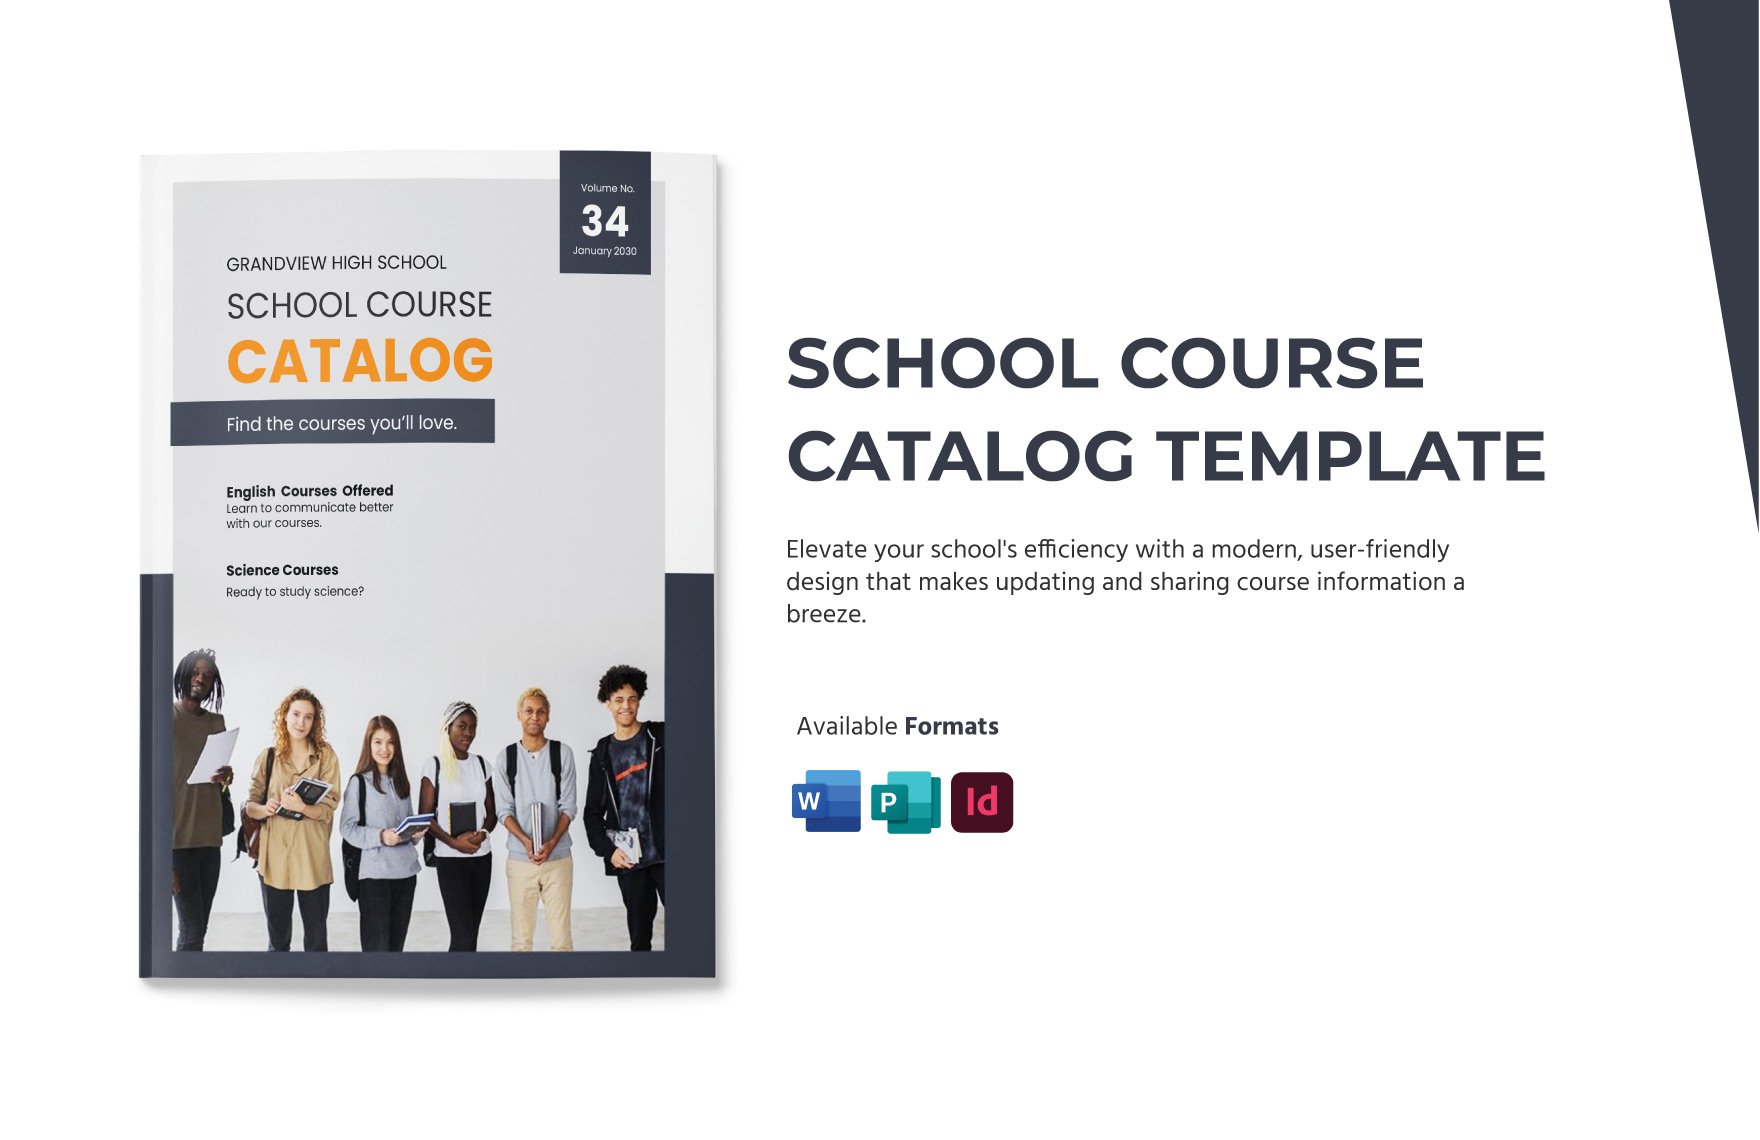 School Course Catalog Template in Word, Publisher, InDesign